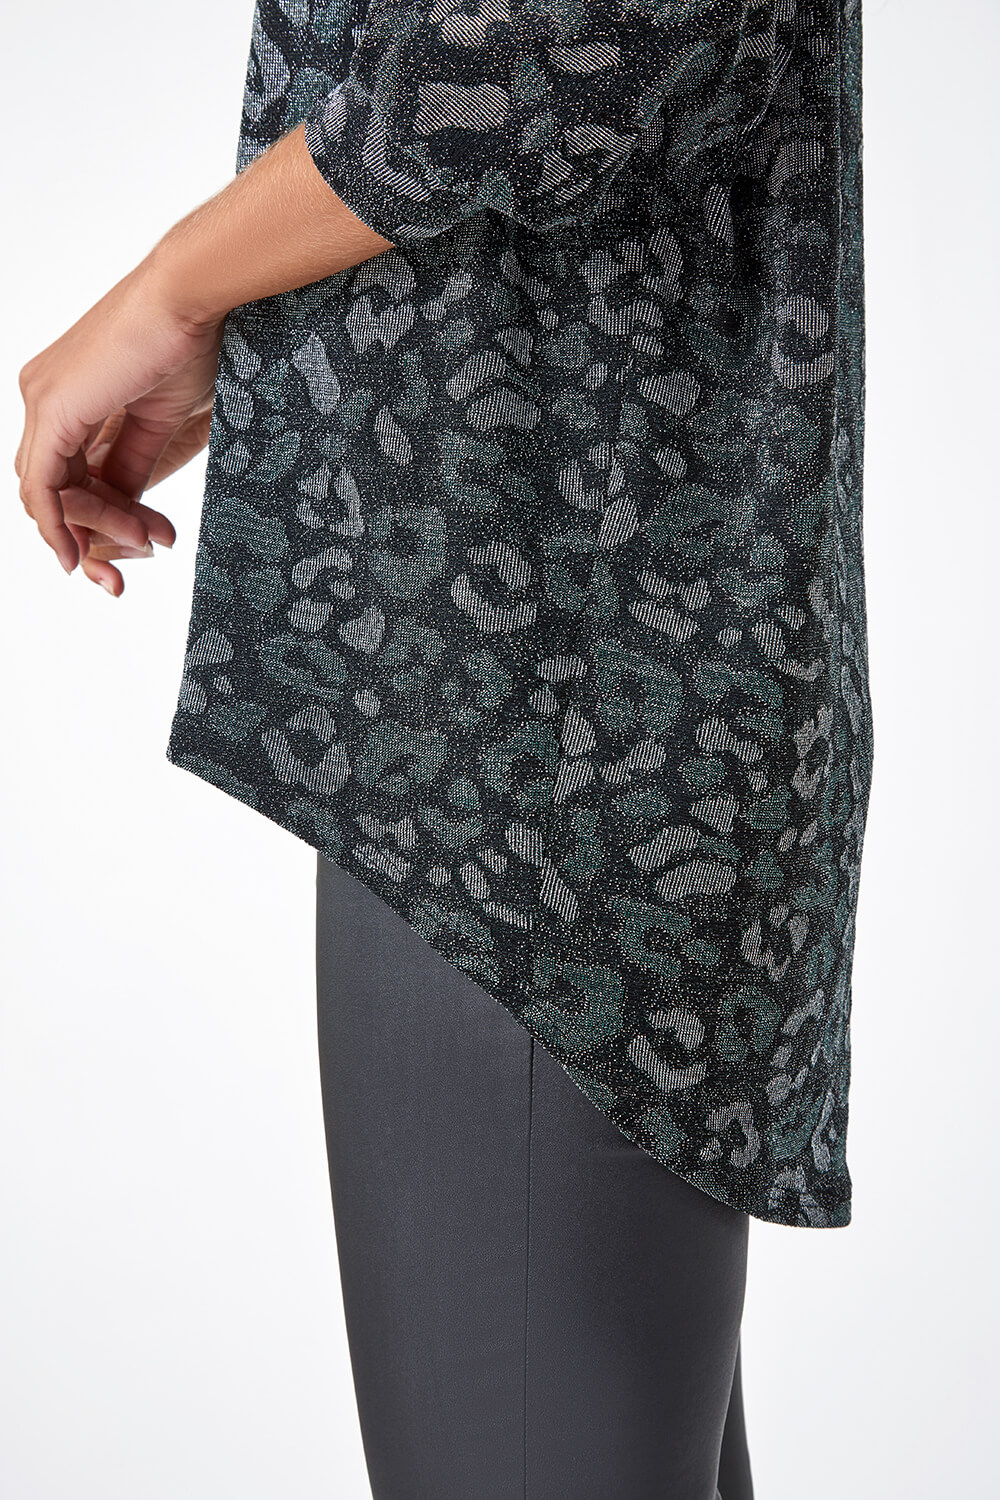 Green Animal Print Shimmer Stretch Top, Image 5 of 5